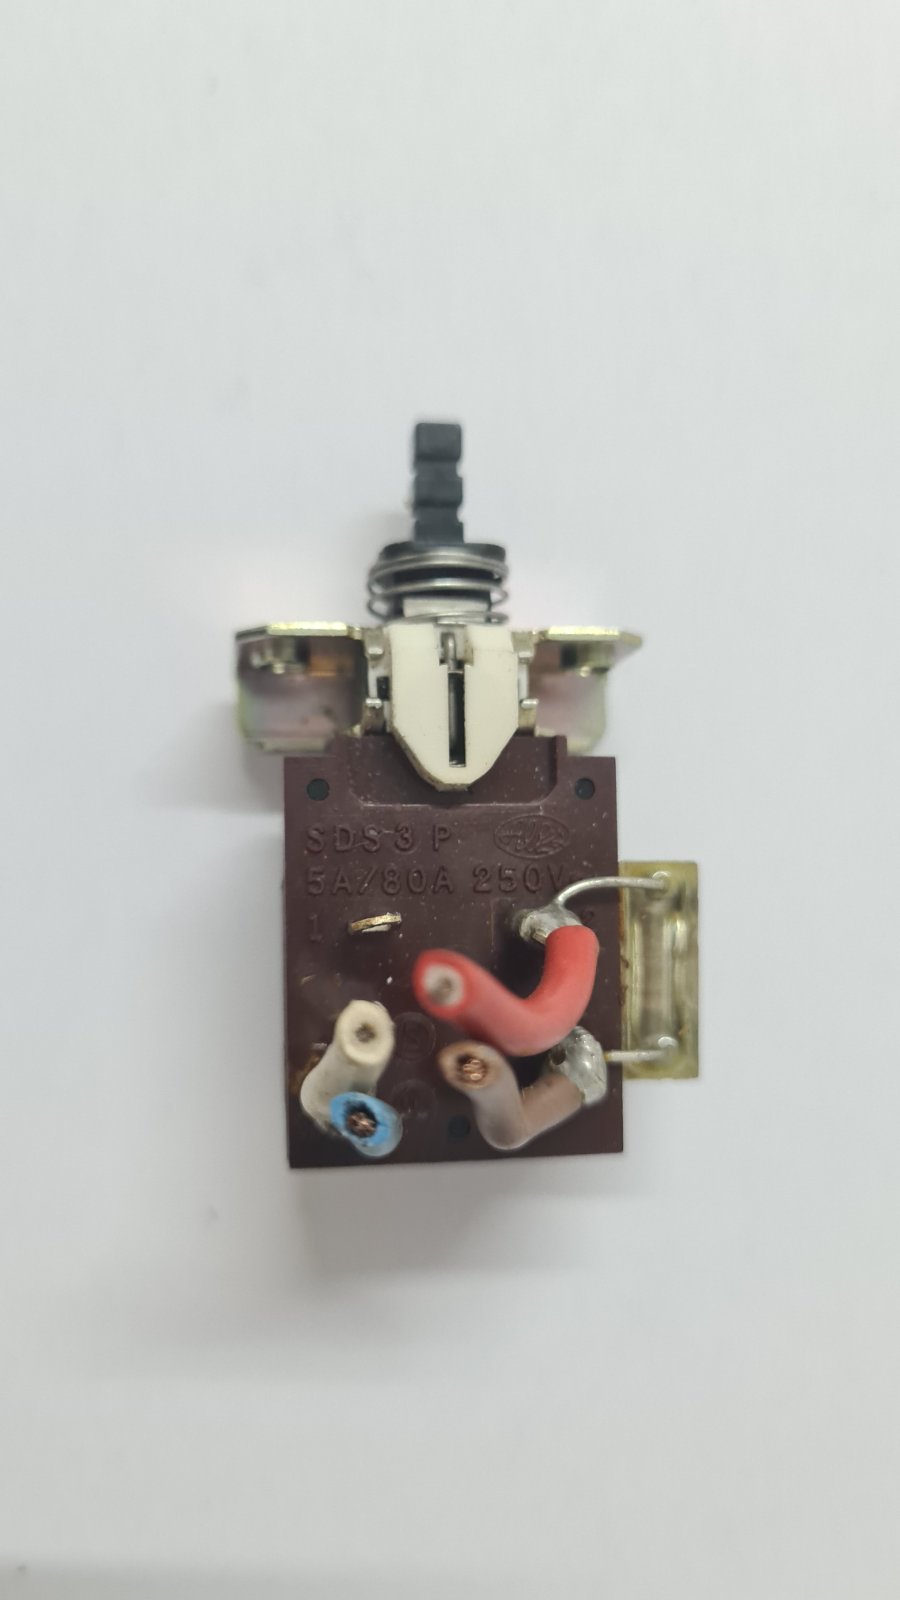 Tascam 133 Mains power switch